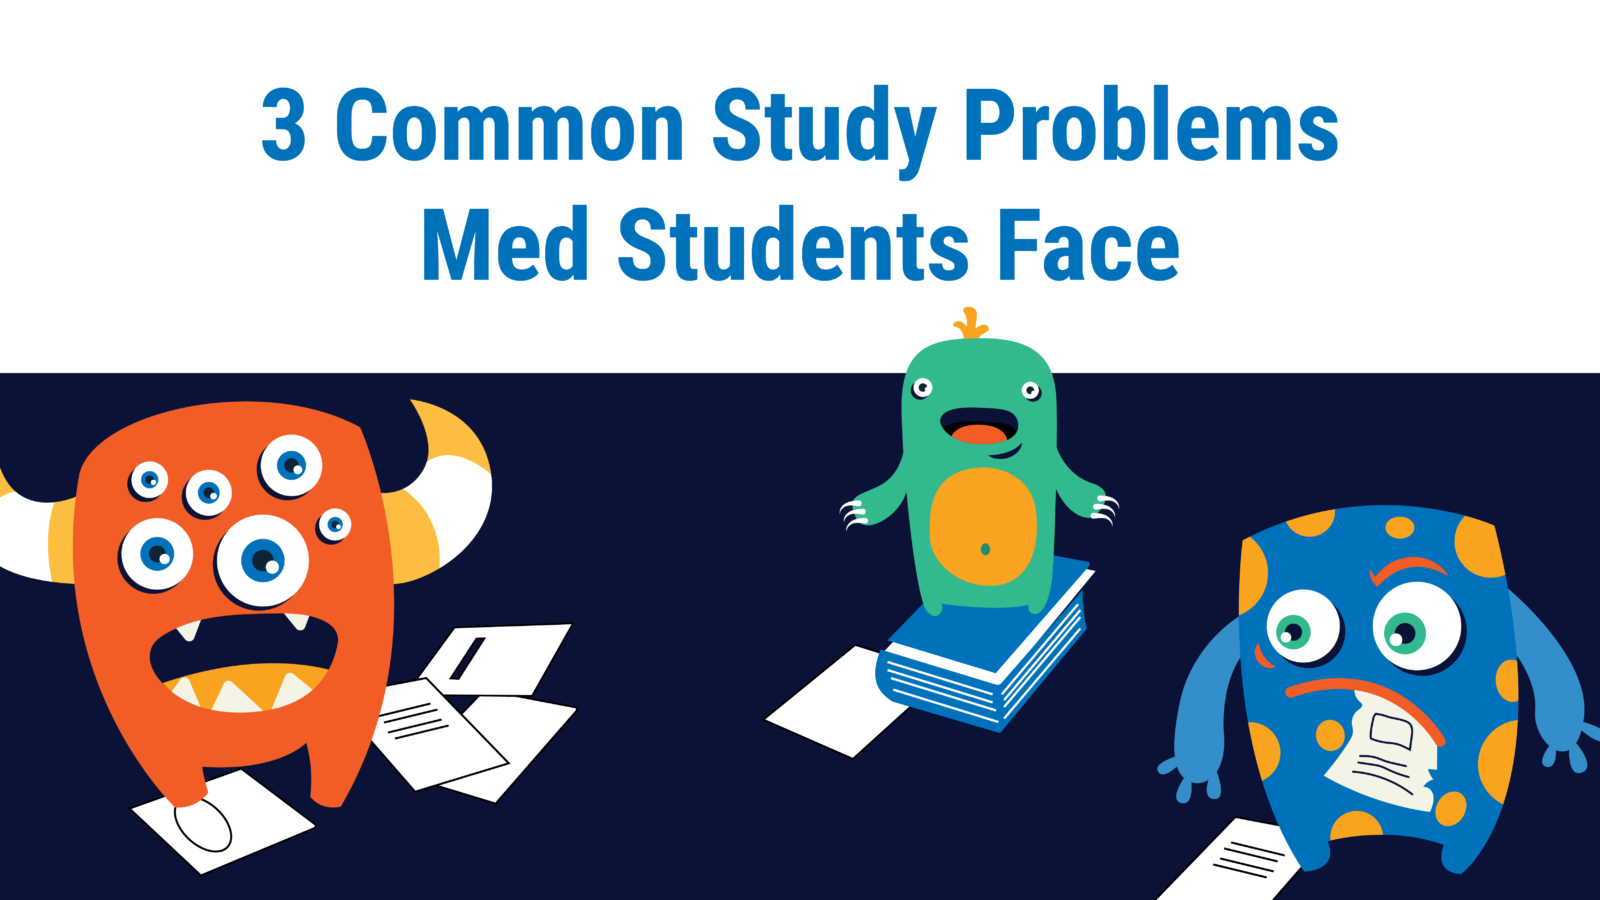 3 Common Study Problems Med Students Face